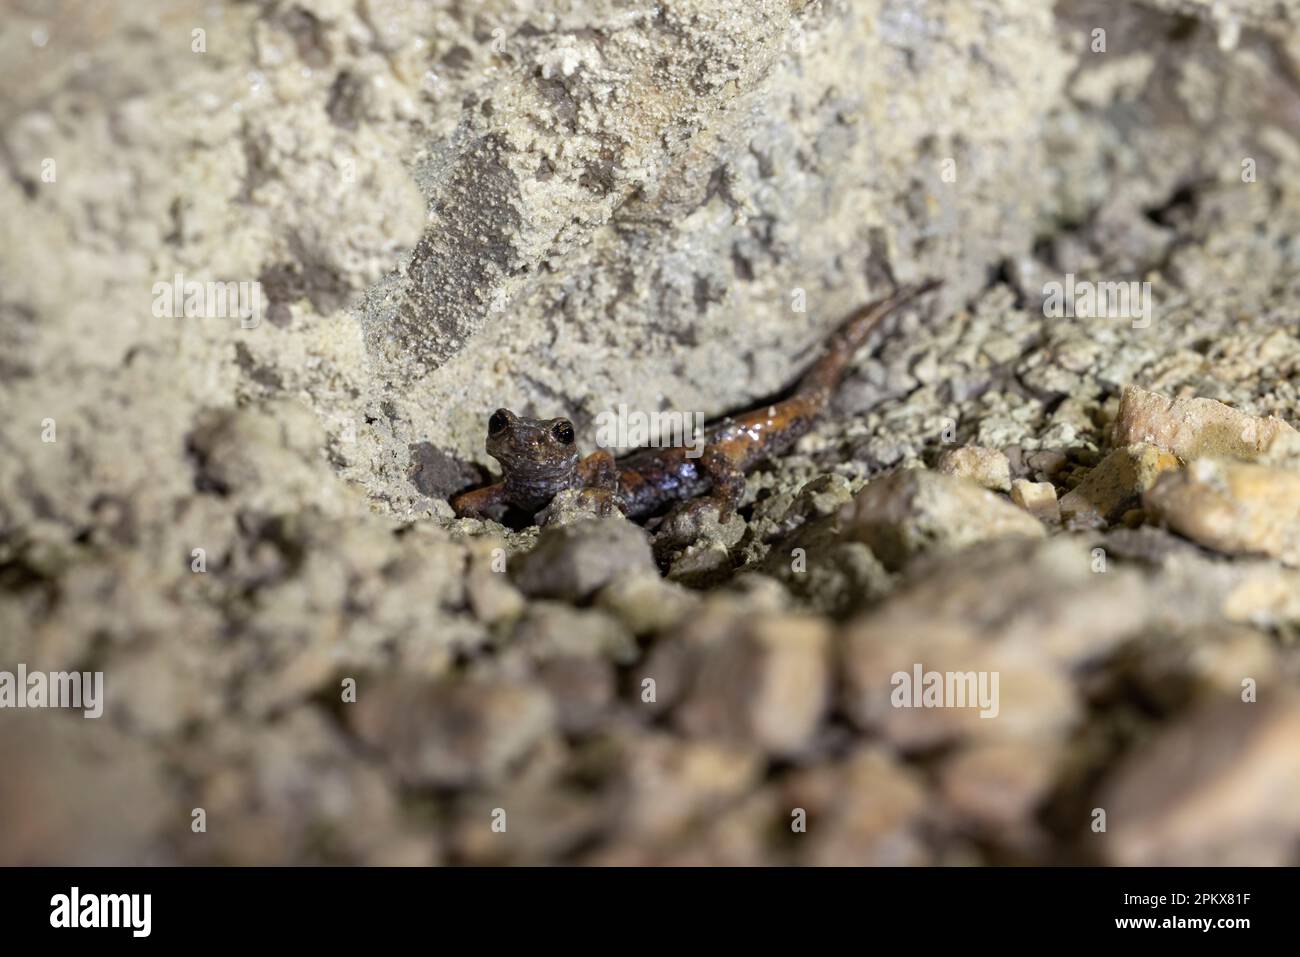 The Italian cave salamander (Speleomantes italicus) is a species of salamander in the family Plethodontidae. Endemic to Italy. Stock Photo